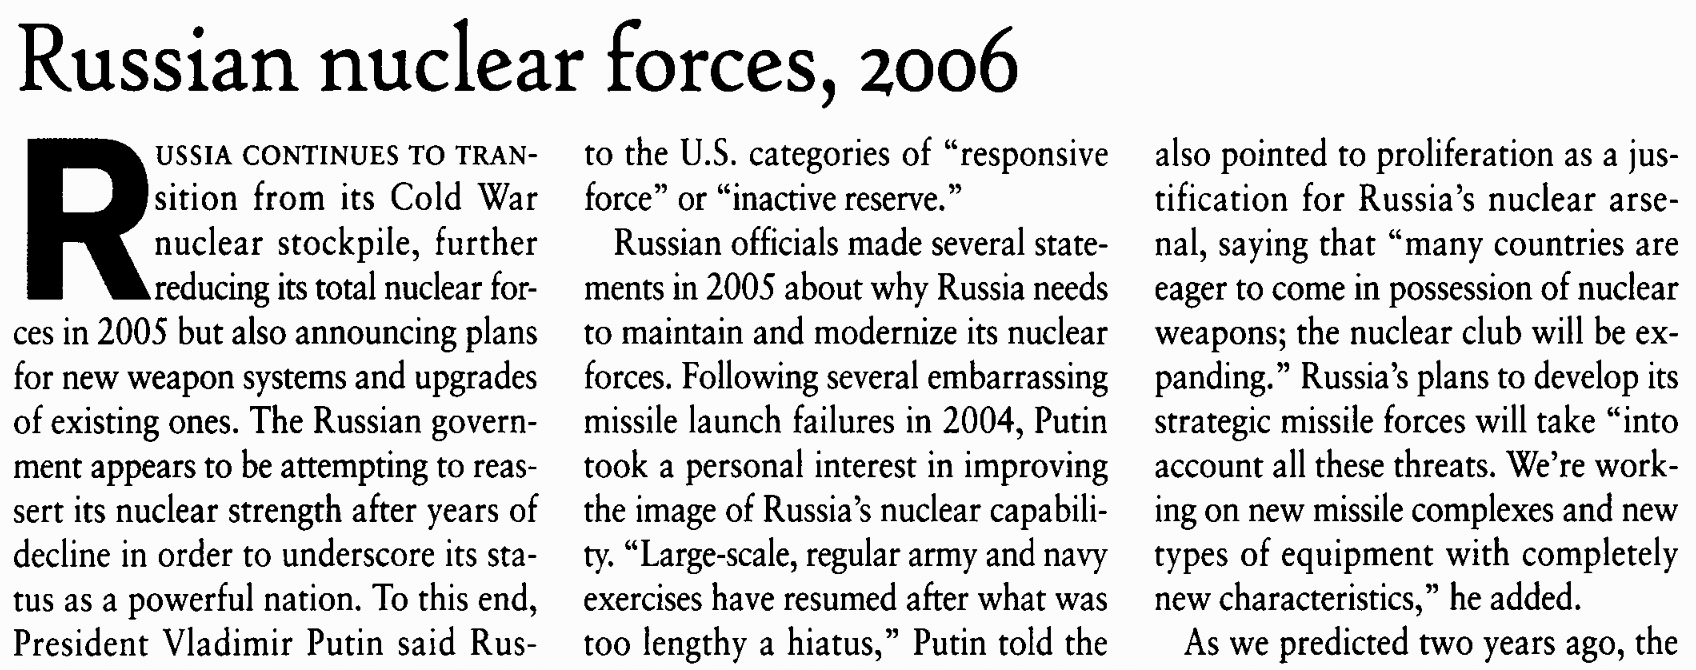 Russian Nuclear Forces, 2006 - Bulletin of the Atomic Scientists